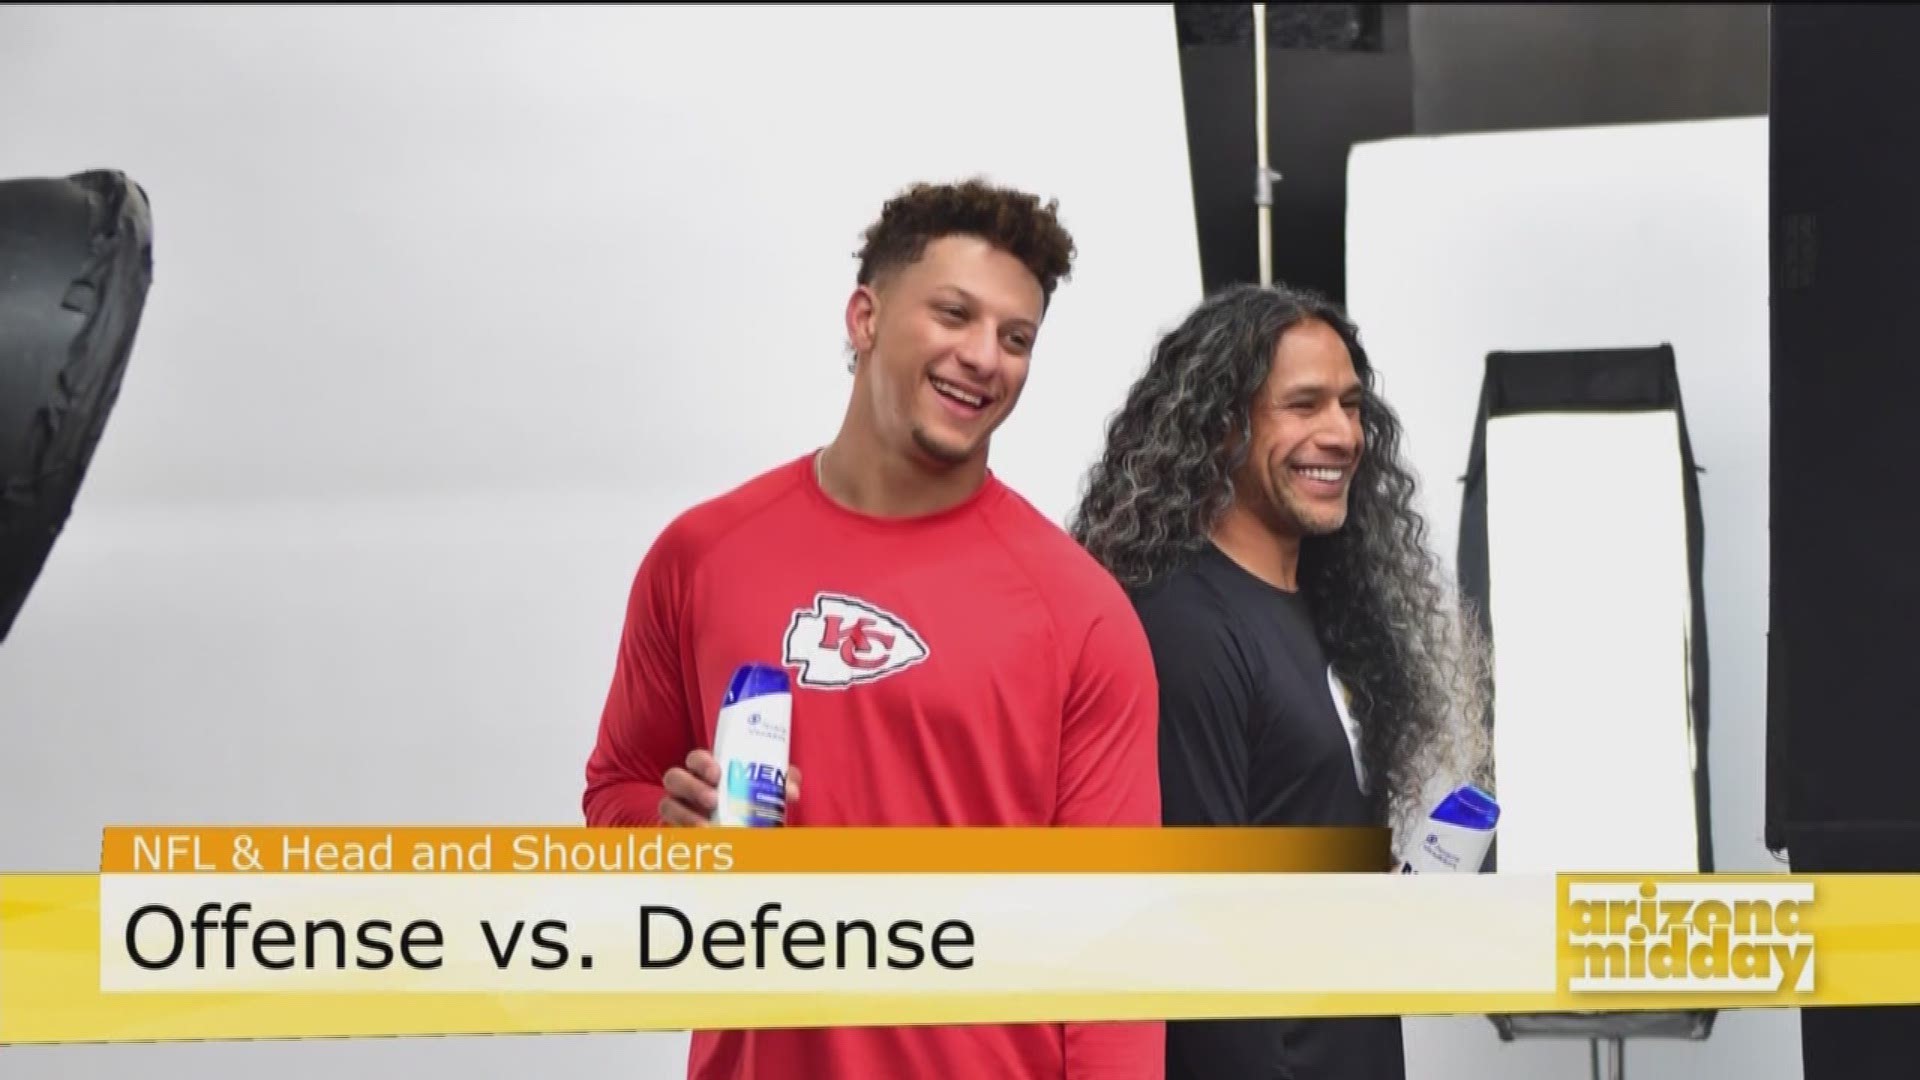 Head & Shoulders and the NFL have teamed up for a new ad campaign to answer an  age-old debate - offense or defense?